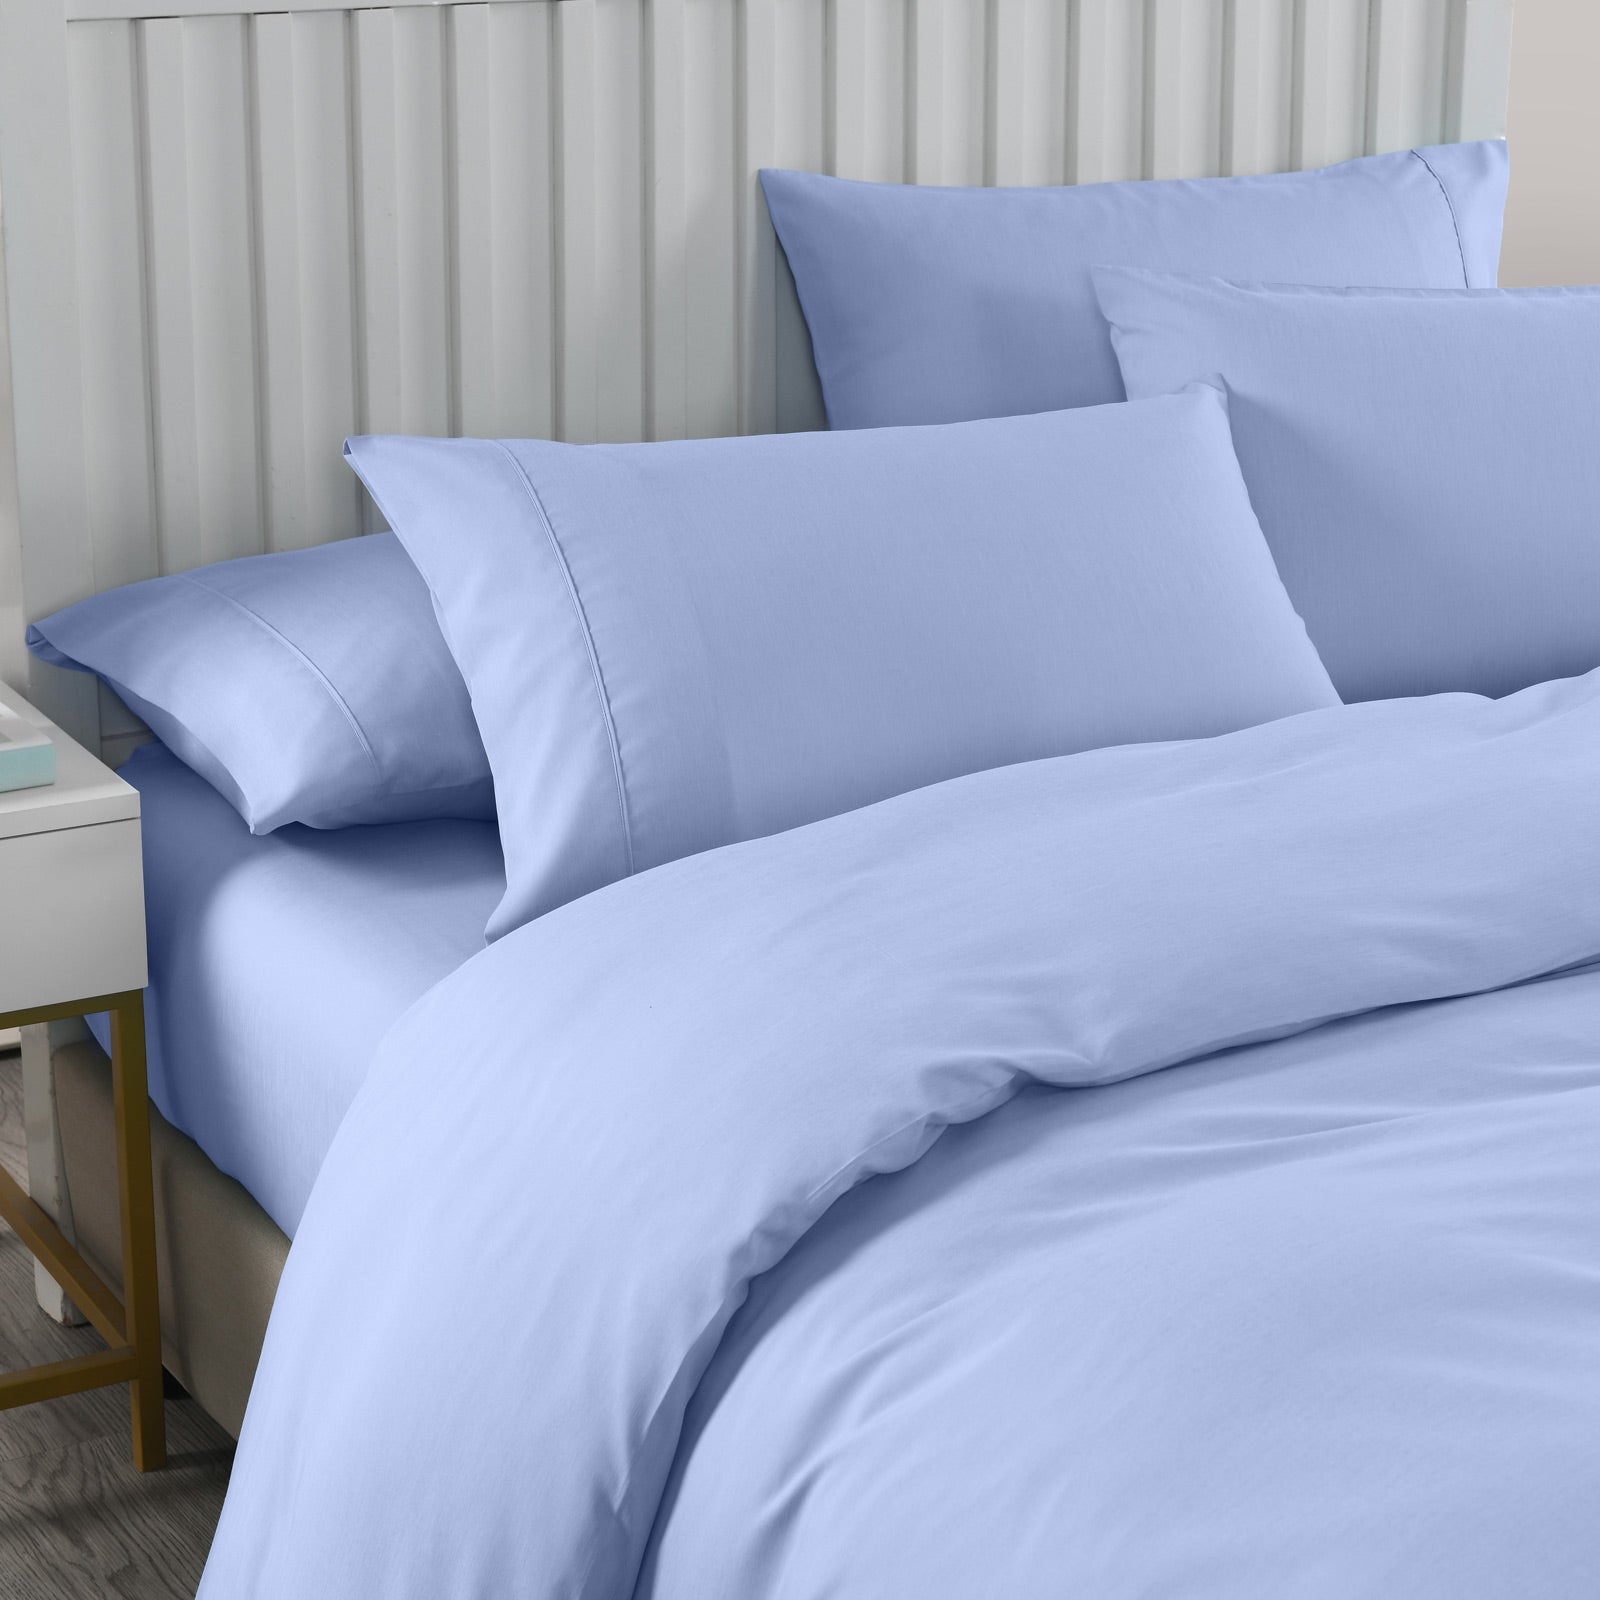 Royal Comfort Bamboo Cooling 2000TC Quilt Cover Set - Queen-Light Blue